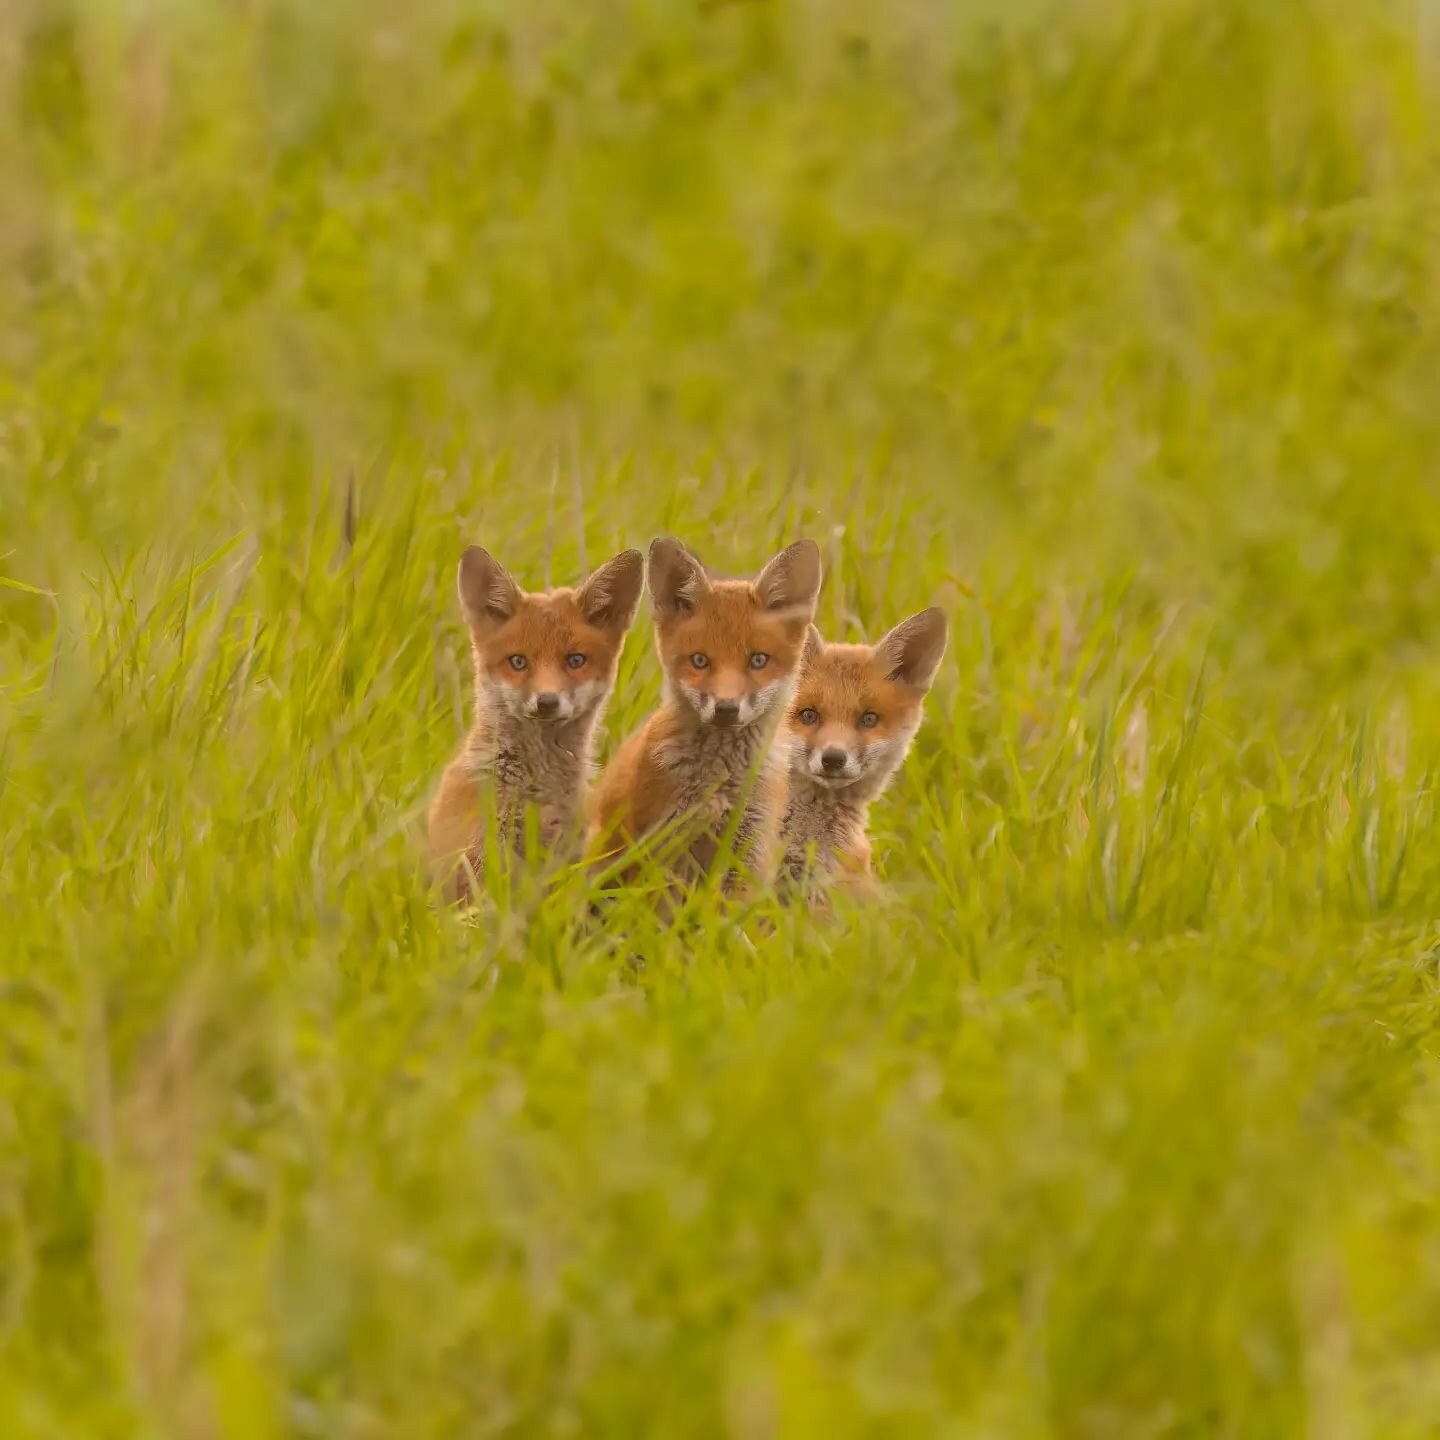 What's cuter than seeing a fox cub?

Three of them! 🦊

Canon EOS R7
Canon EF 600mm F4L IS 
Canon EOSR-EF mount adapter 

ISO: 2000
F4
1/2500

@canonuk

#canonuk #conkernaturemagazine #photography #canon #photographer #nature #naturephotography #shot